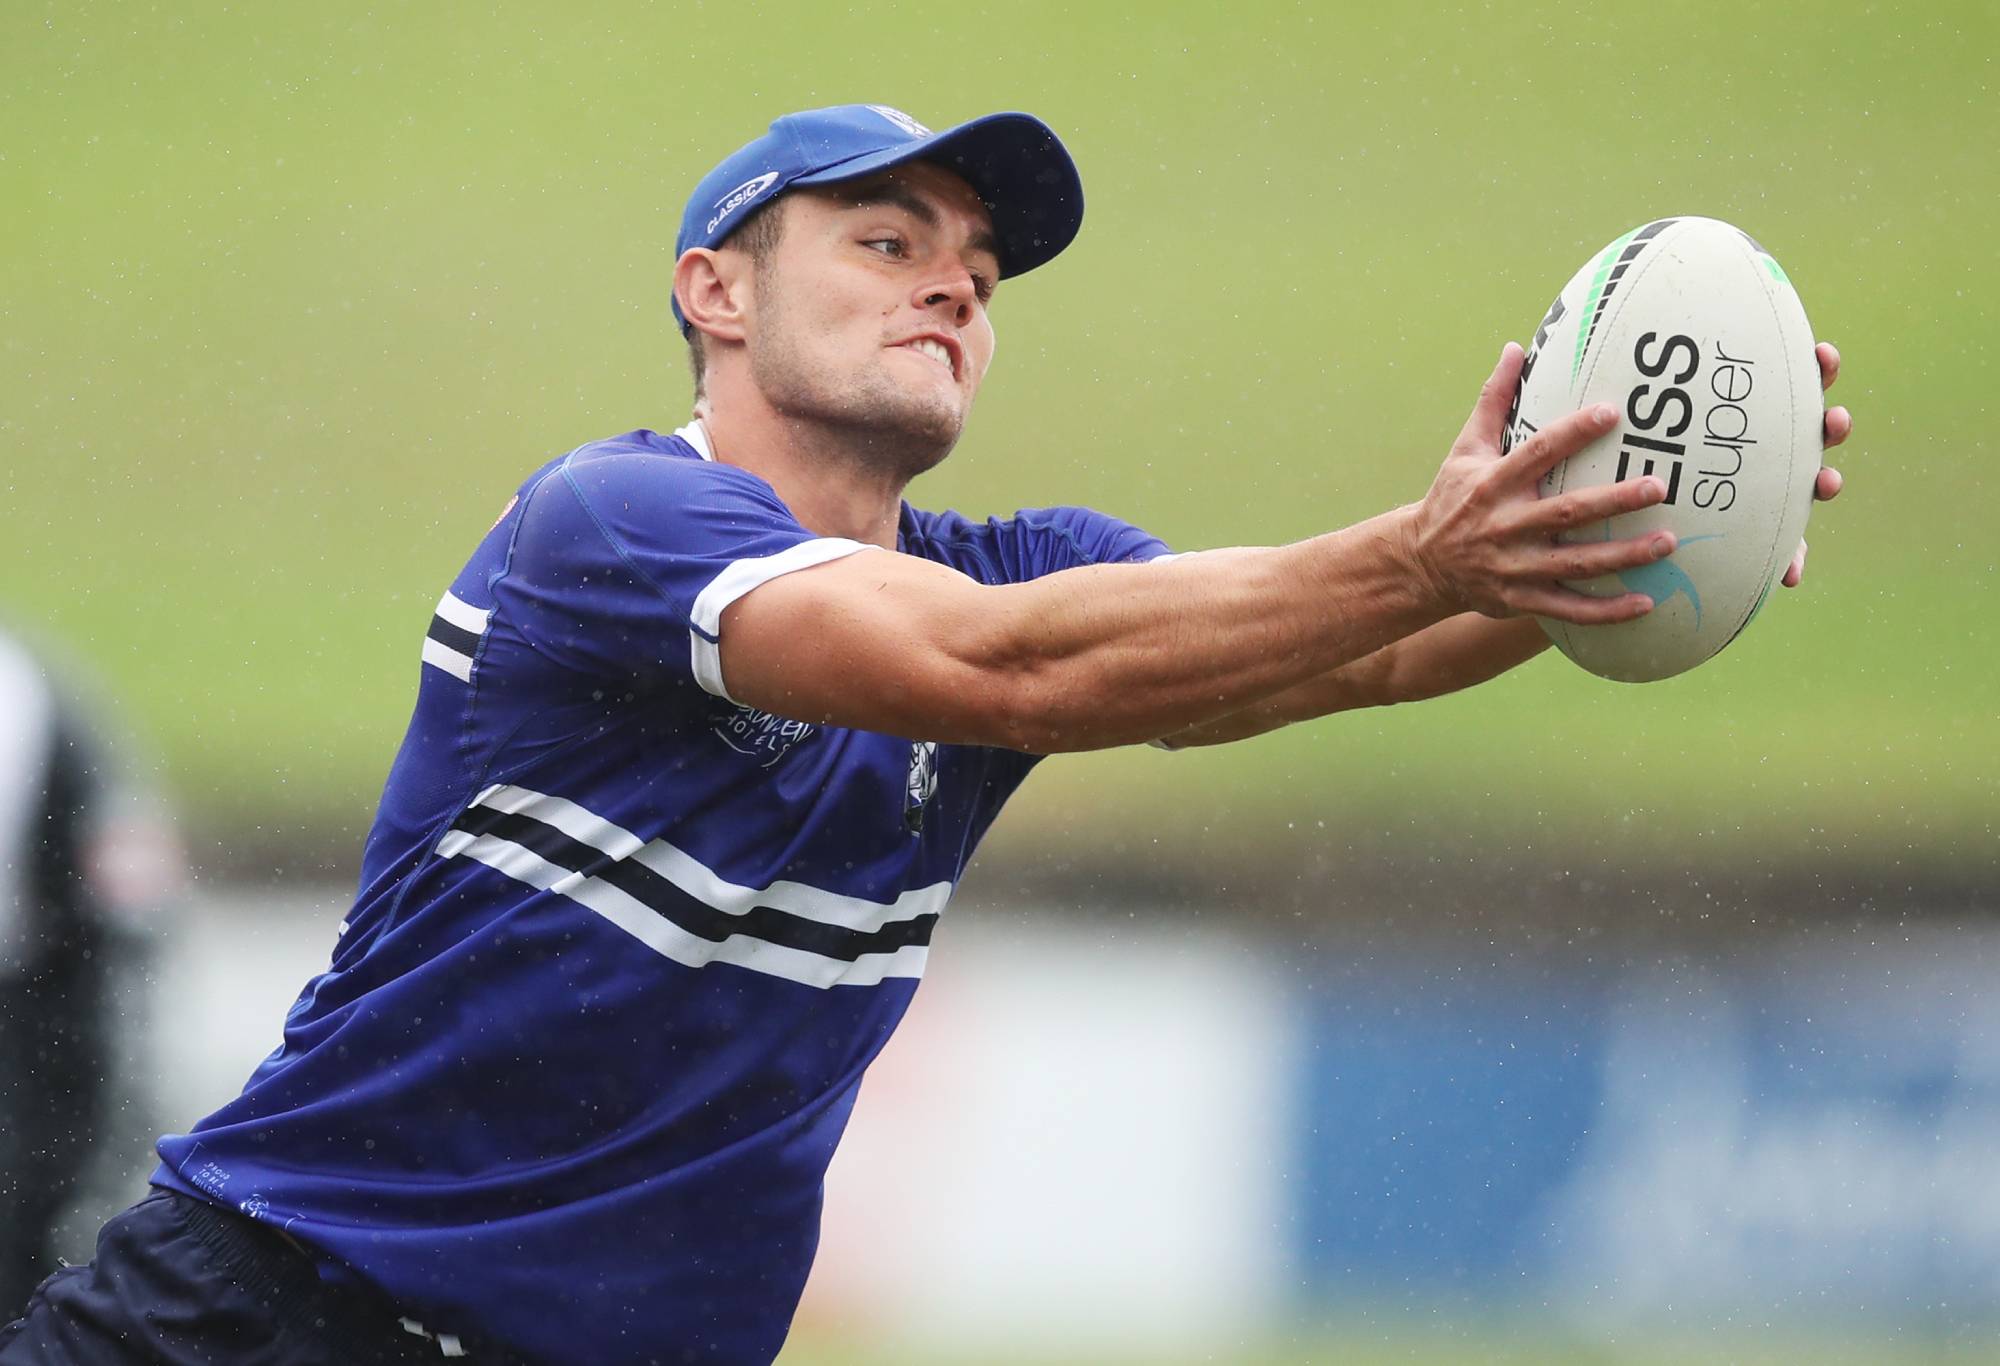 SYDNEY, AUSTRALIA - MARCH 16: Kyle Flanagan of the Bulldogs handles the ball during a Canterbury Bulldogs NRL training session at Belmore Sports Ground on March 16, 2022 in Sydney, Australia. (Photo by Matt King/Getty Images)